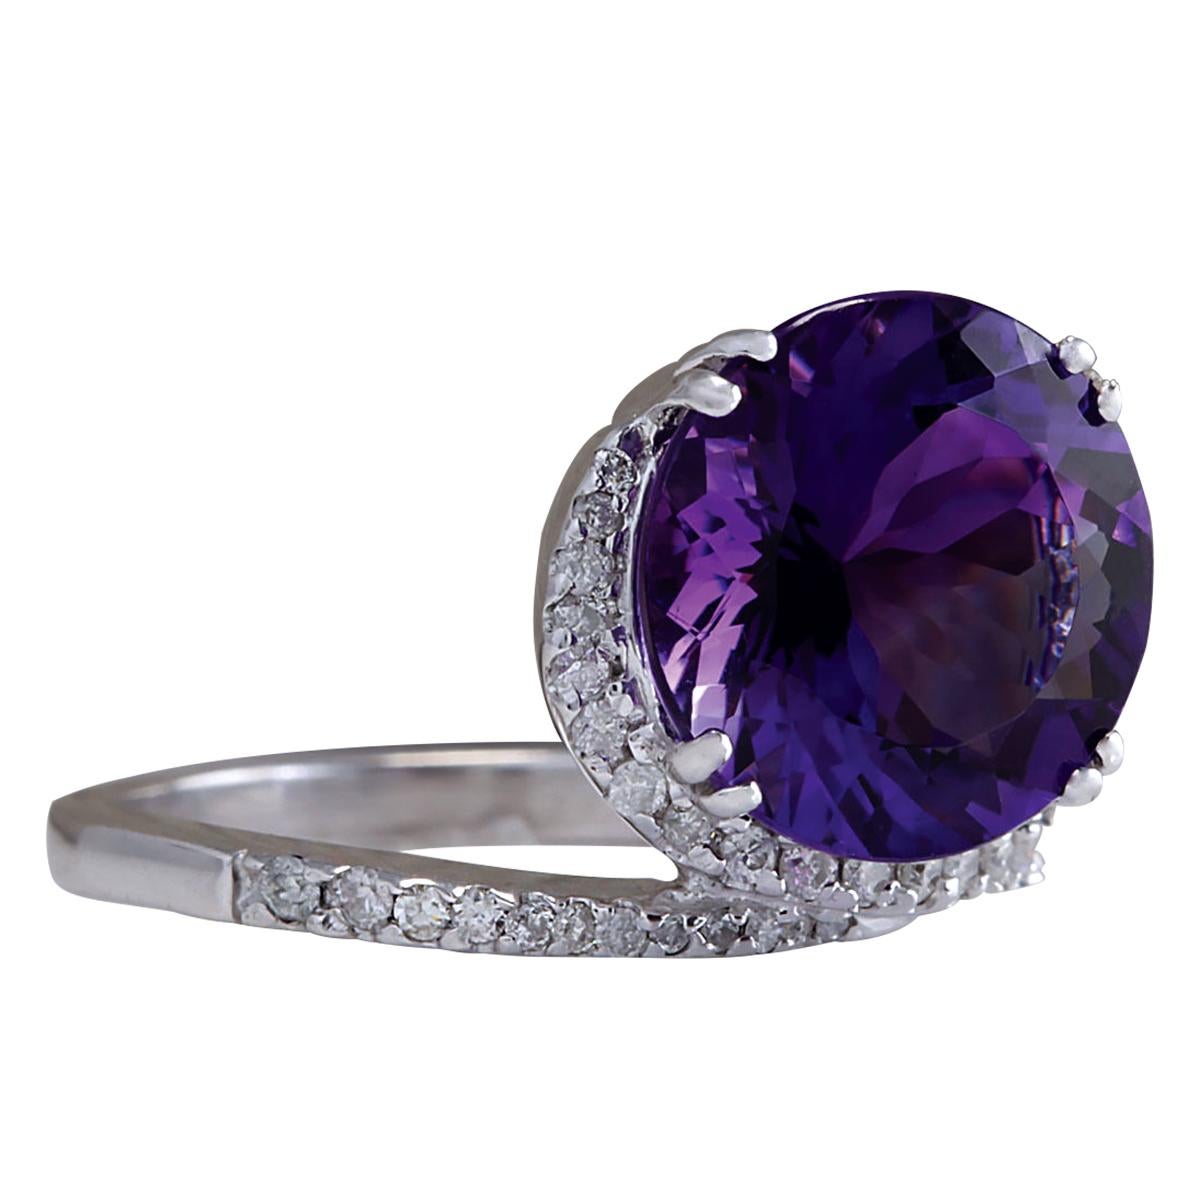 Stamped: 14K White Gold
Total Ring Weight: 7.0 Grams
Total Natural Amethyst Weight is 8.87 Carat (Measures: 13.00x13.00 mm)
Color: Purple
Total Natural Diamond Weight is 0.35 Carat
Color: F-G, Clarity: VS2-SI1
Face Measures: 15.90x14.50 mm
Sku: